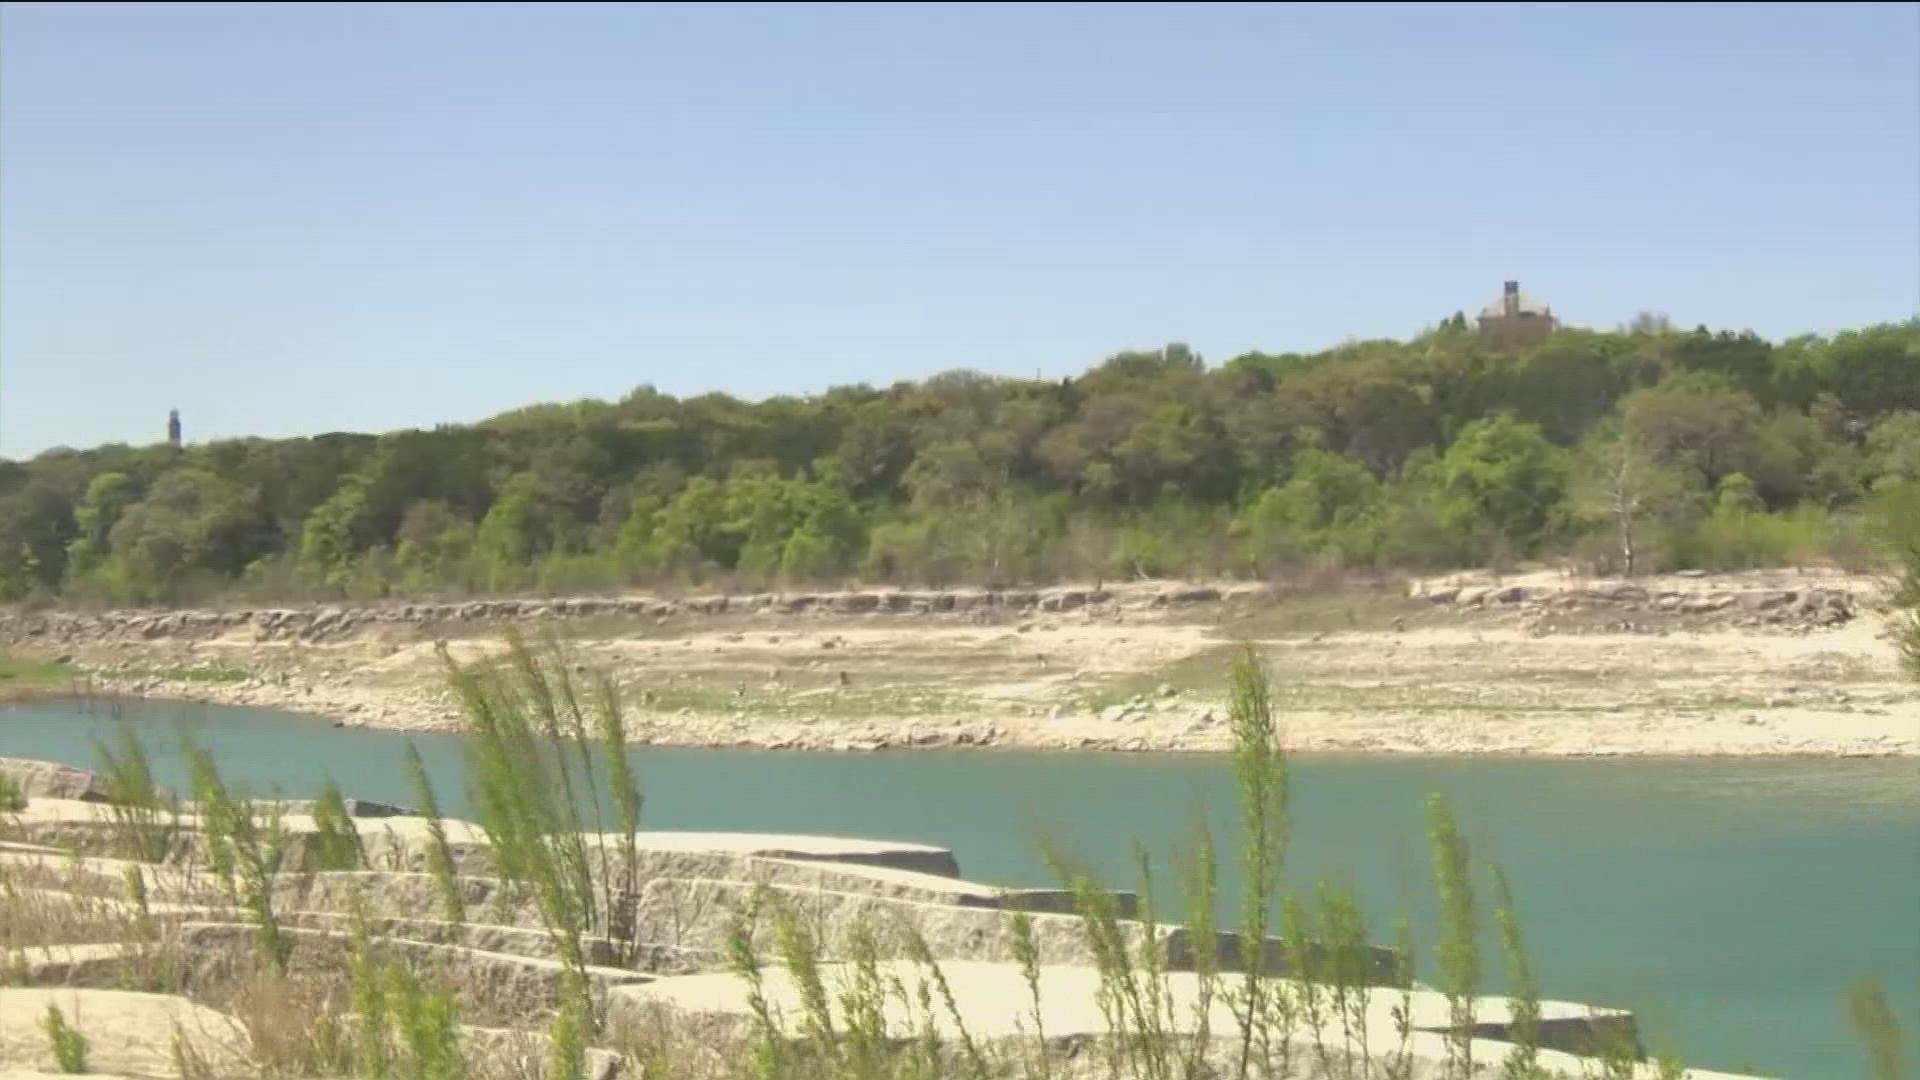 Lake Travis is the lowest it's been since 2018. Water restrictions are now in place for homeowners and businesses.